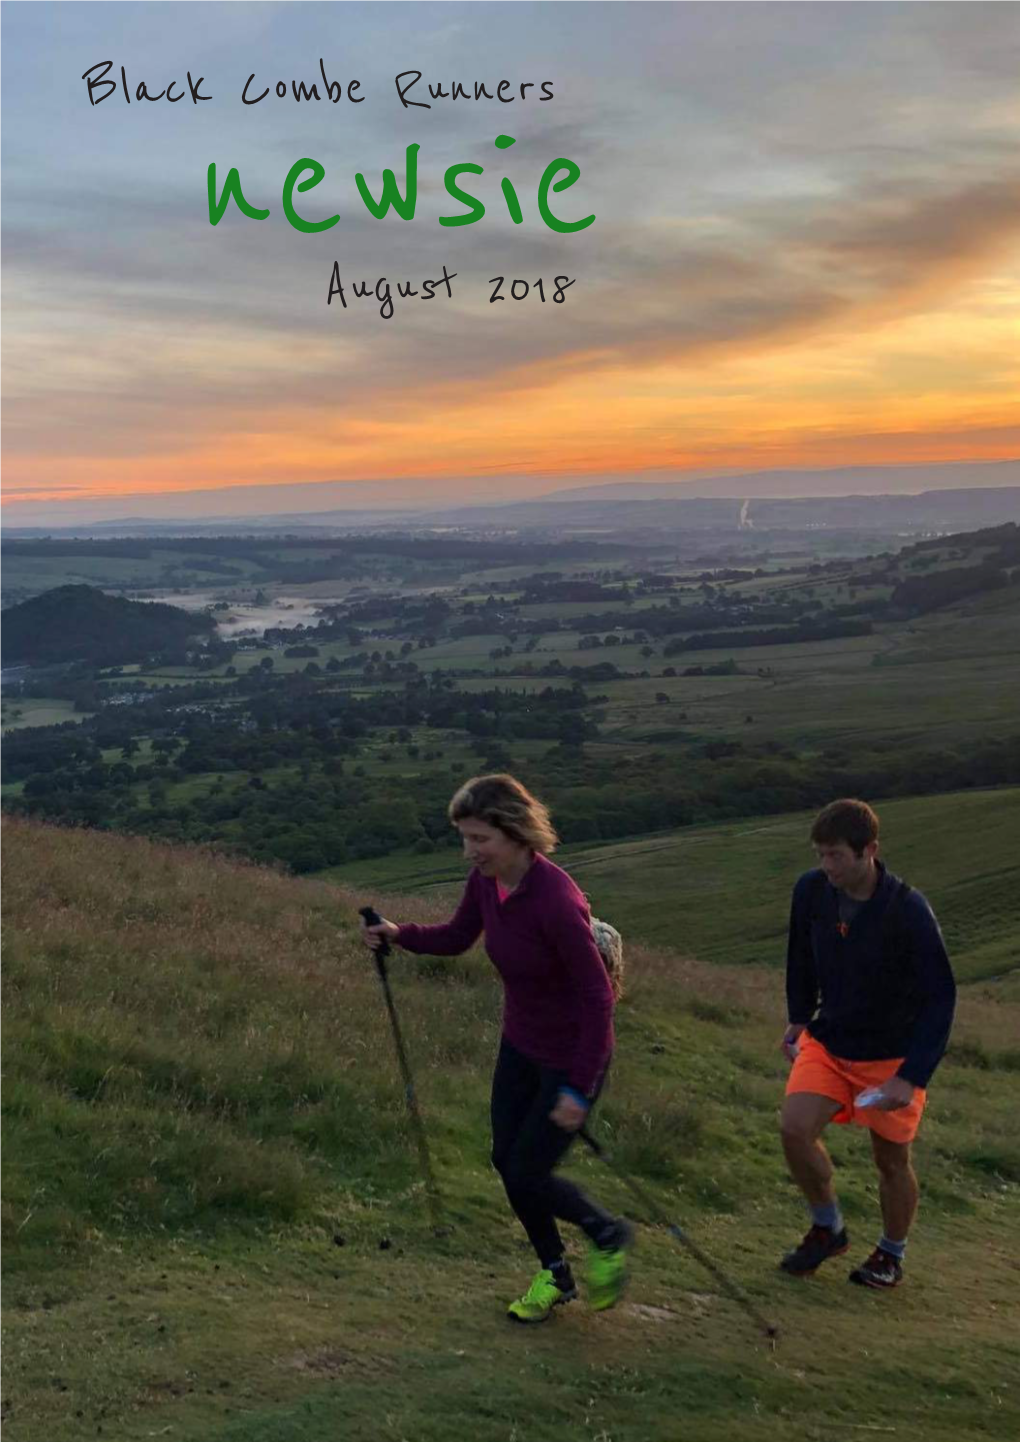 Black Combe Runners August 2018